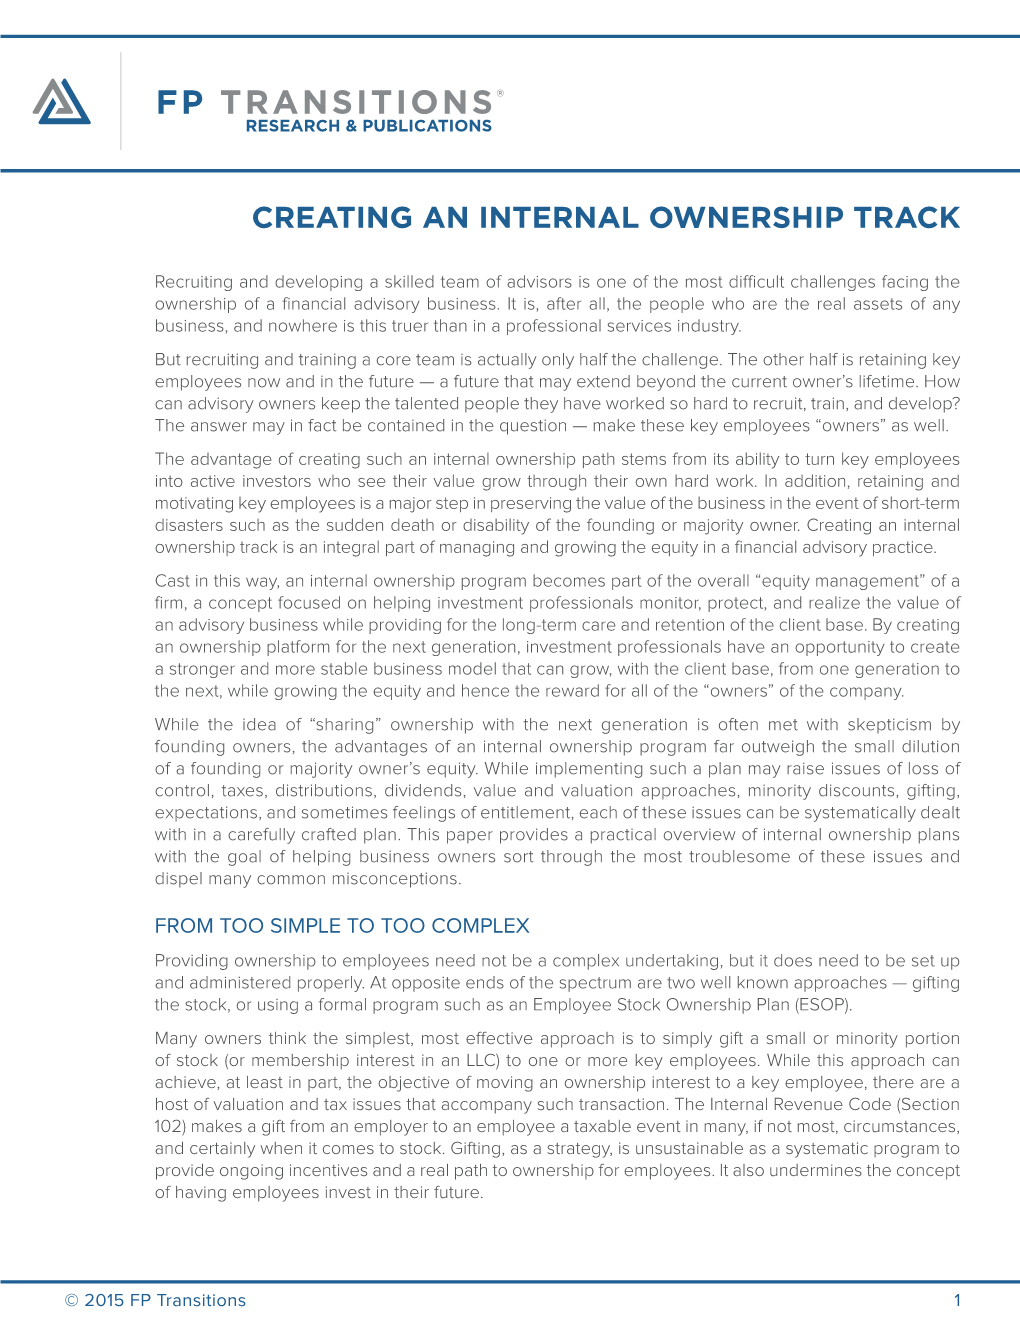 Creating an Internal Ownership Track